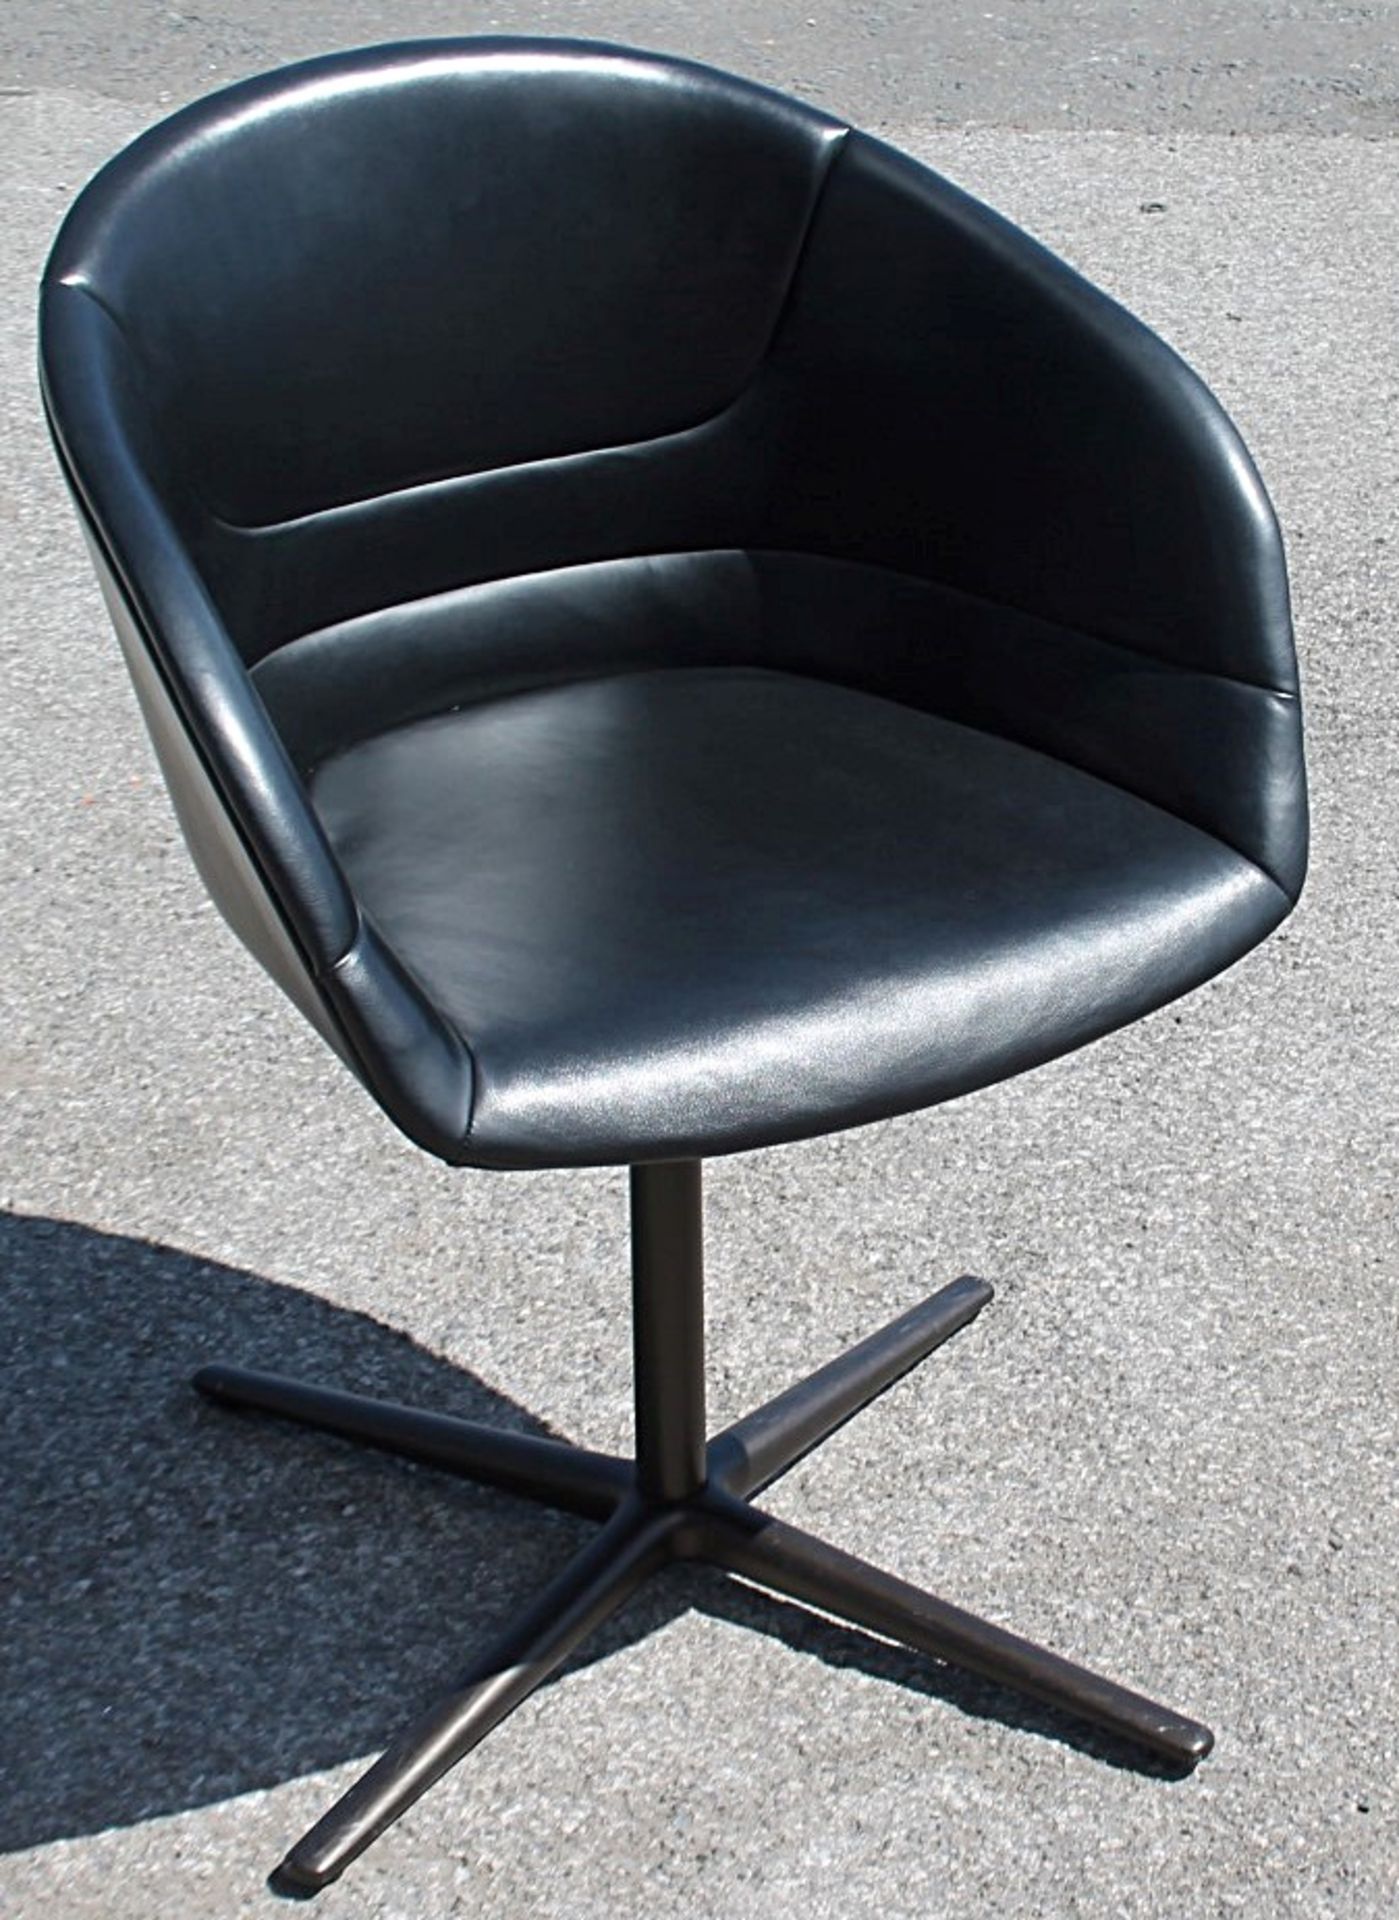 1 x WALTER KNOLL 'Kyo' Genuine Leather Upholstered Chair - Original RRP £1,979 - CL753 - Ref: - Image 6 of 7